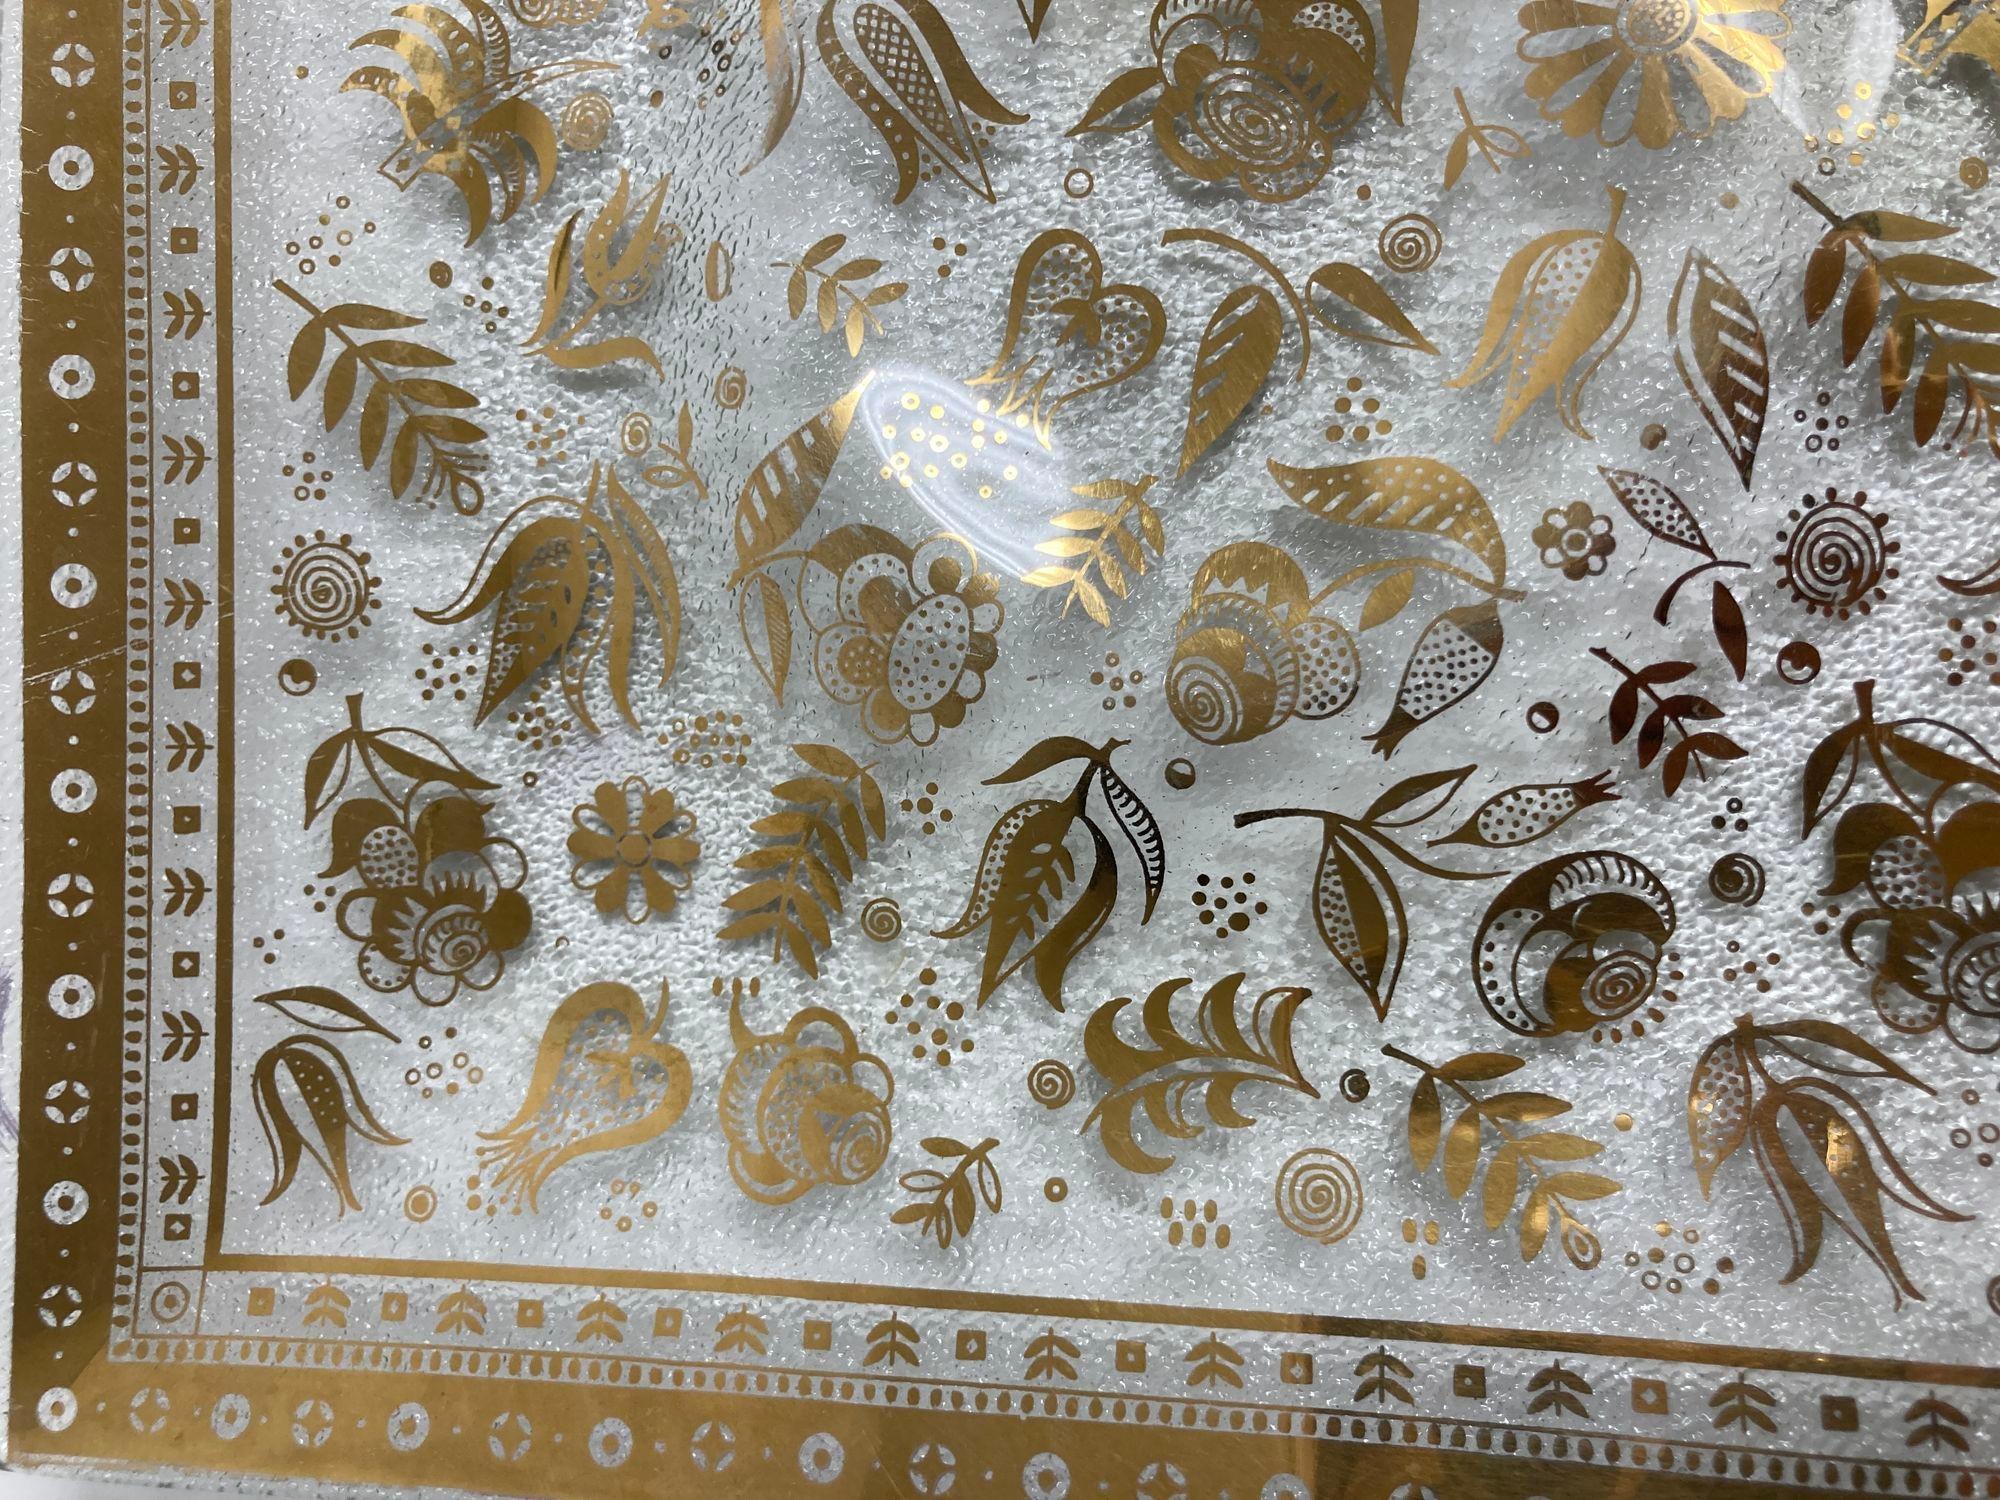 1960s Georges Briard Bent Glass Tray Persian Garden Pattern Dish.
Vintage gold and transparent floral serving dish by Georges Briard in the 22k gold 